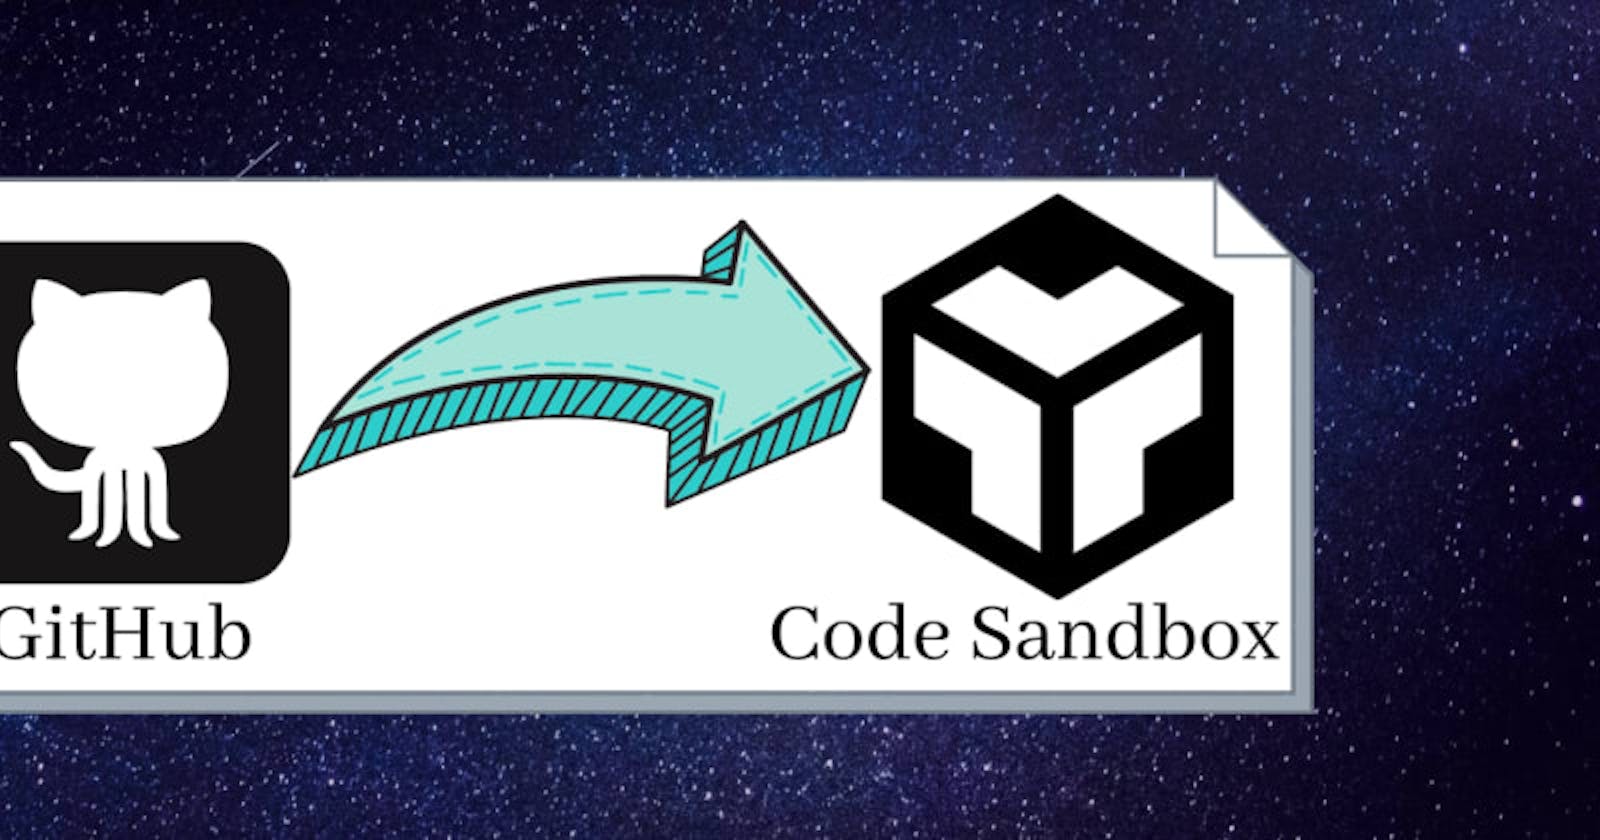 Open any public GitHub repo in Codesandbox in 3 seconds